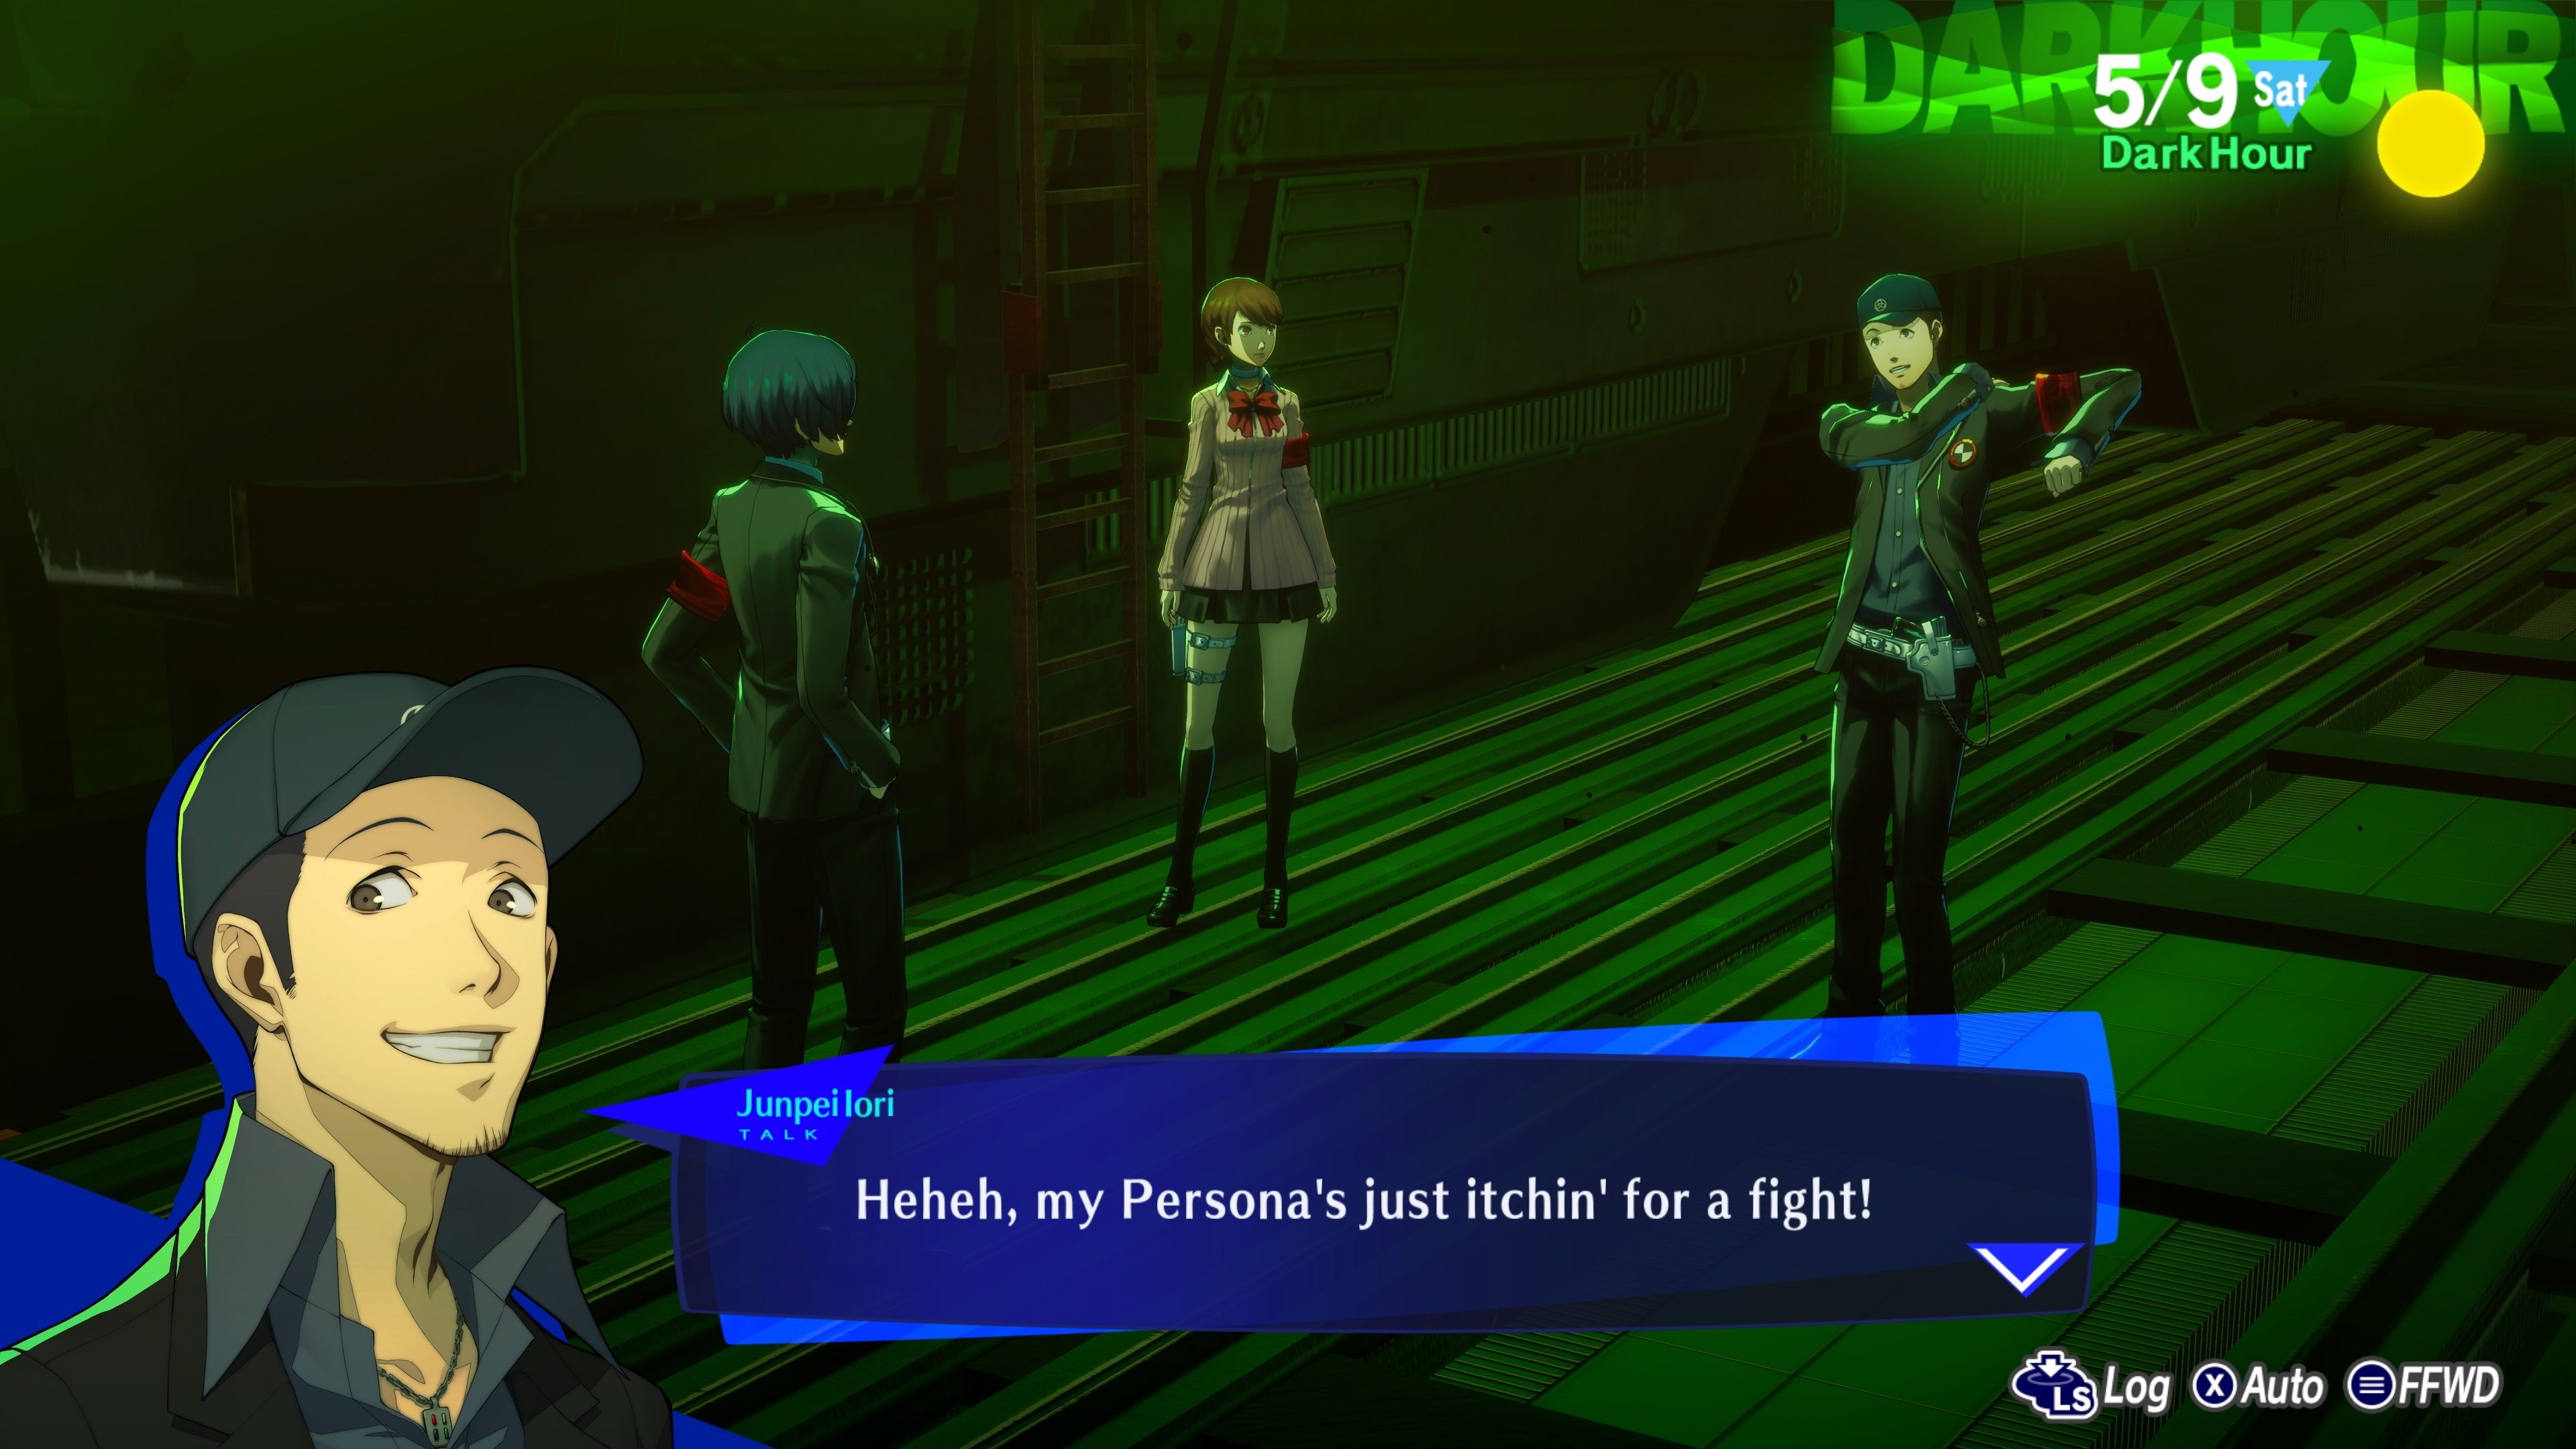 Persona 3 Reload is the definitive version of the game I've been